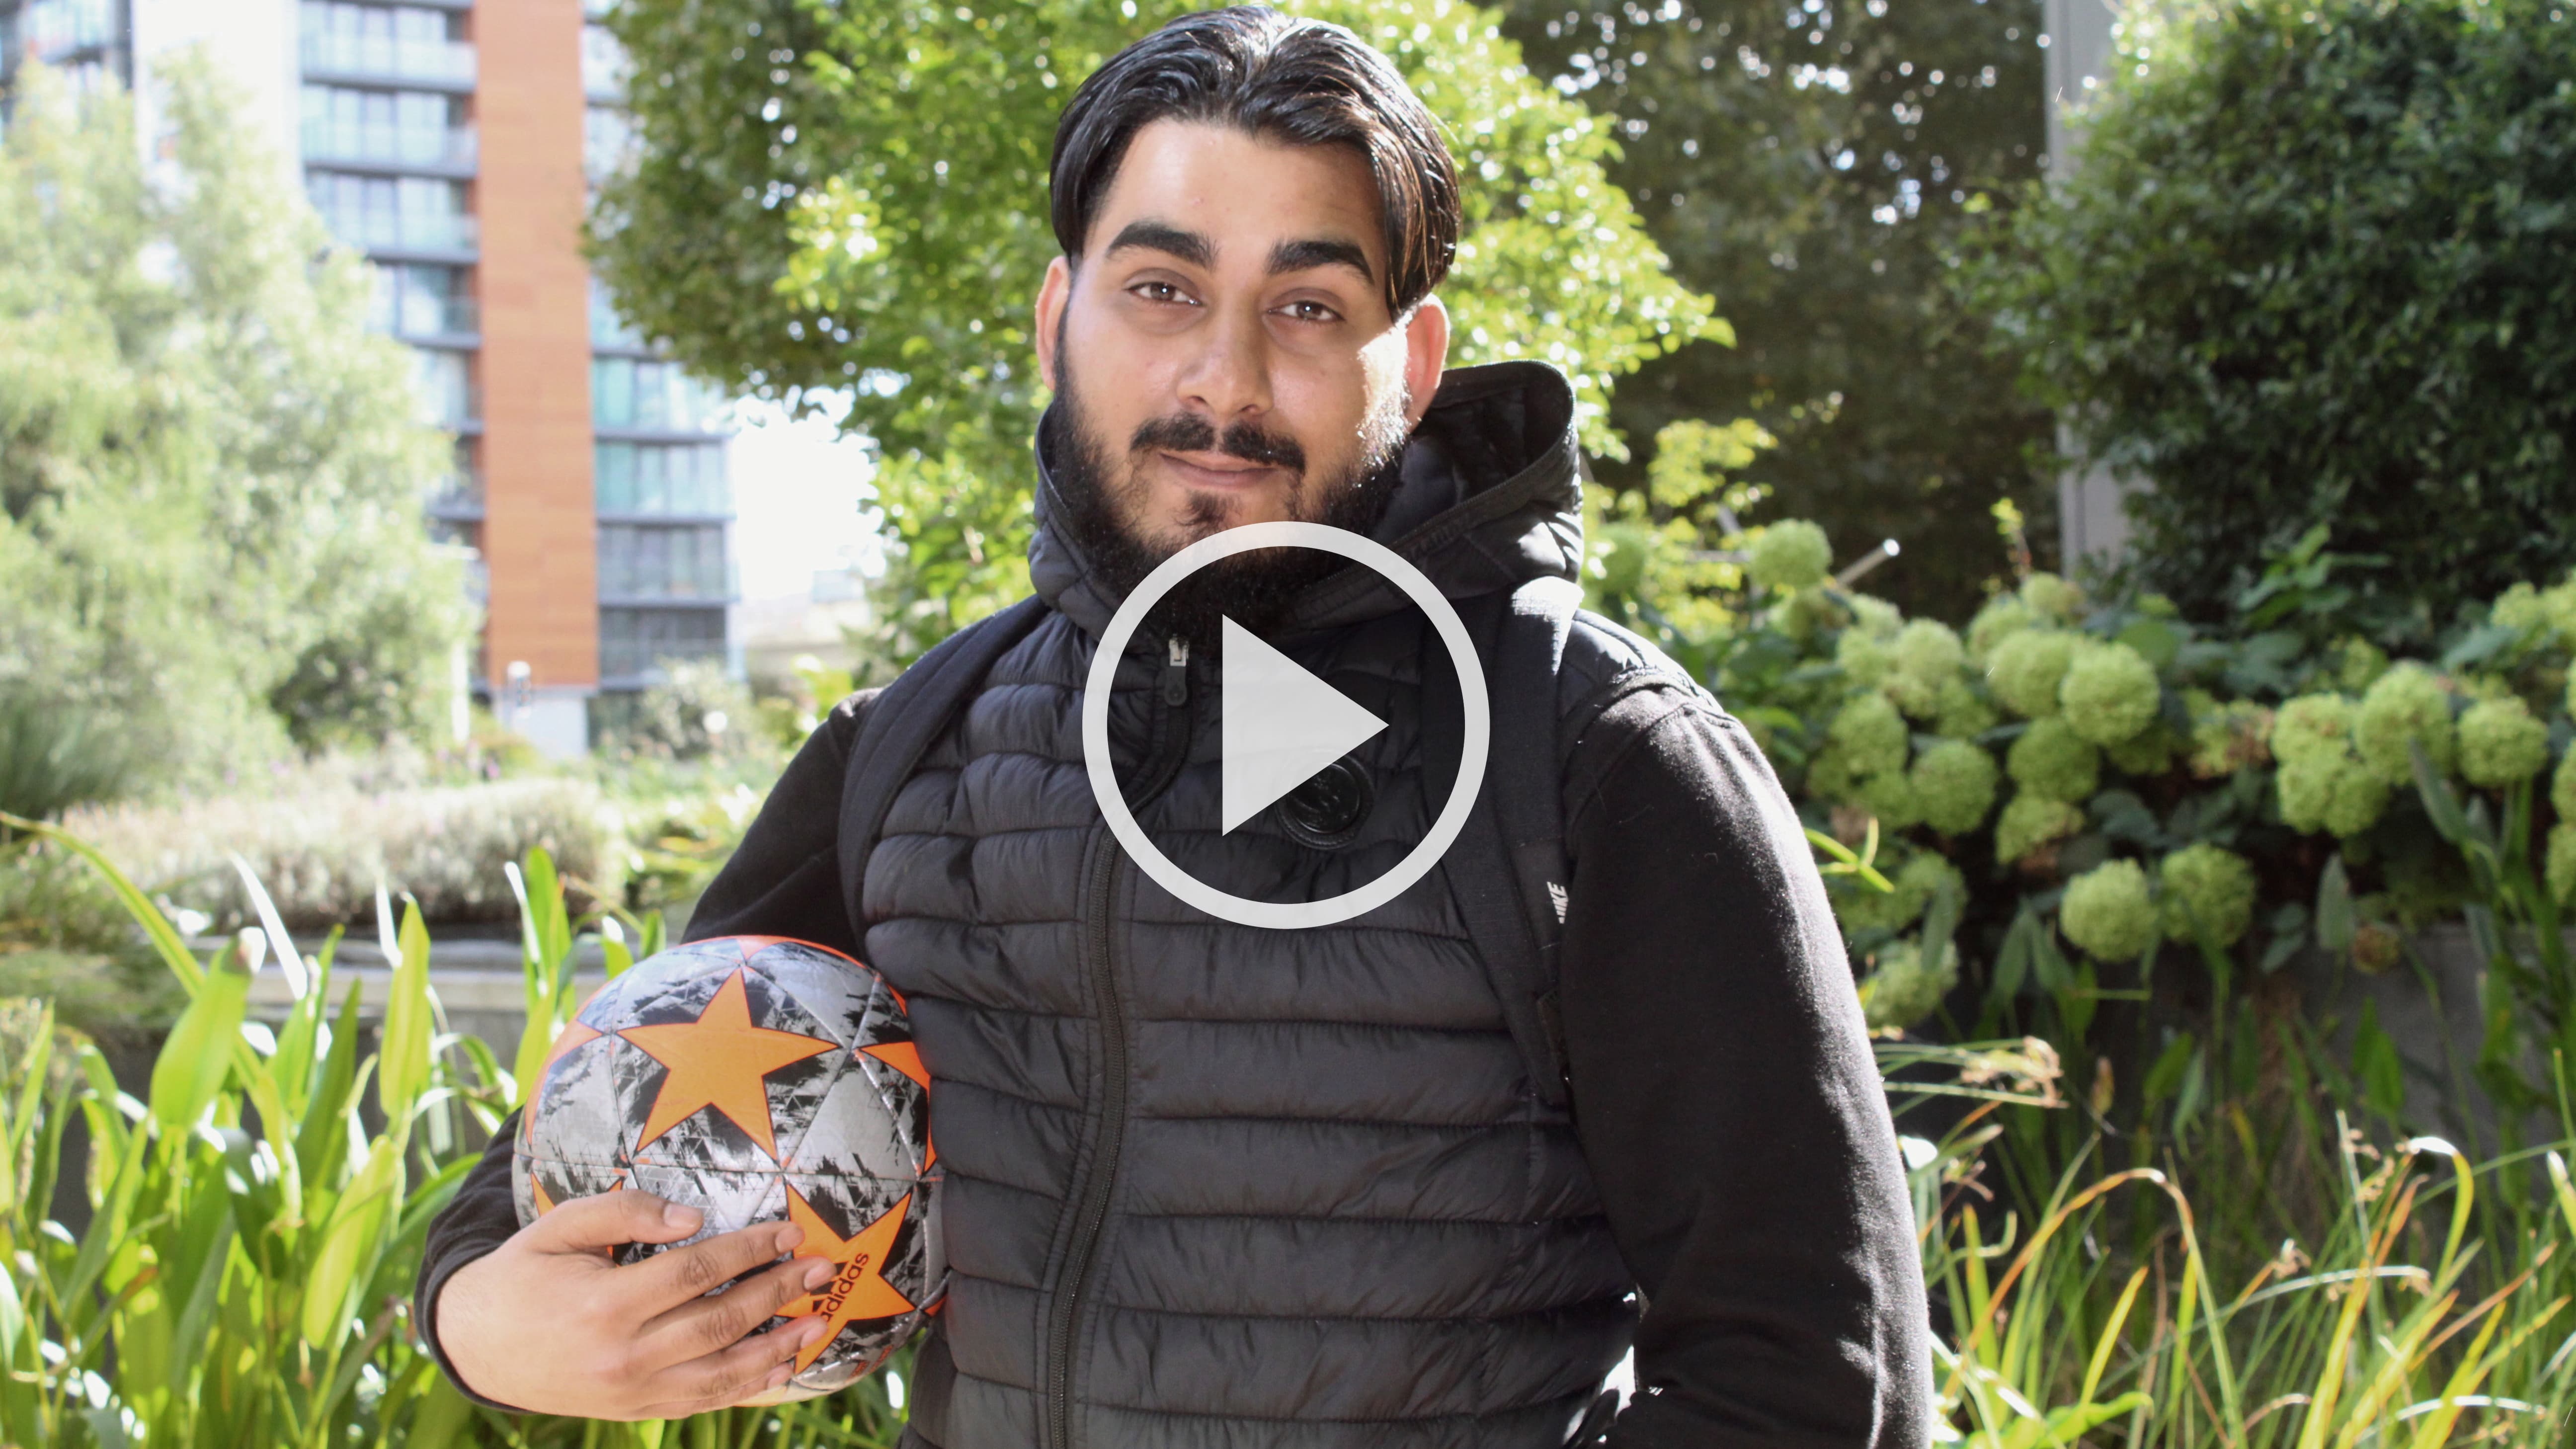 Mukadim, a young person supported by City Gateway, featured in our 2021 film ‘Making up for lost time.’